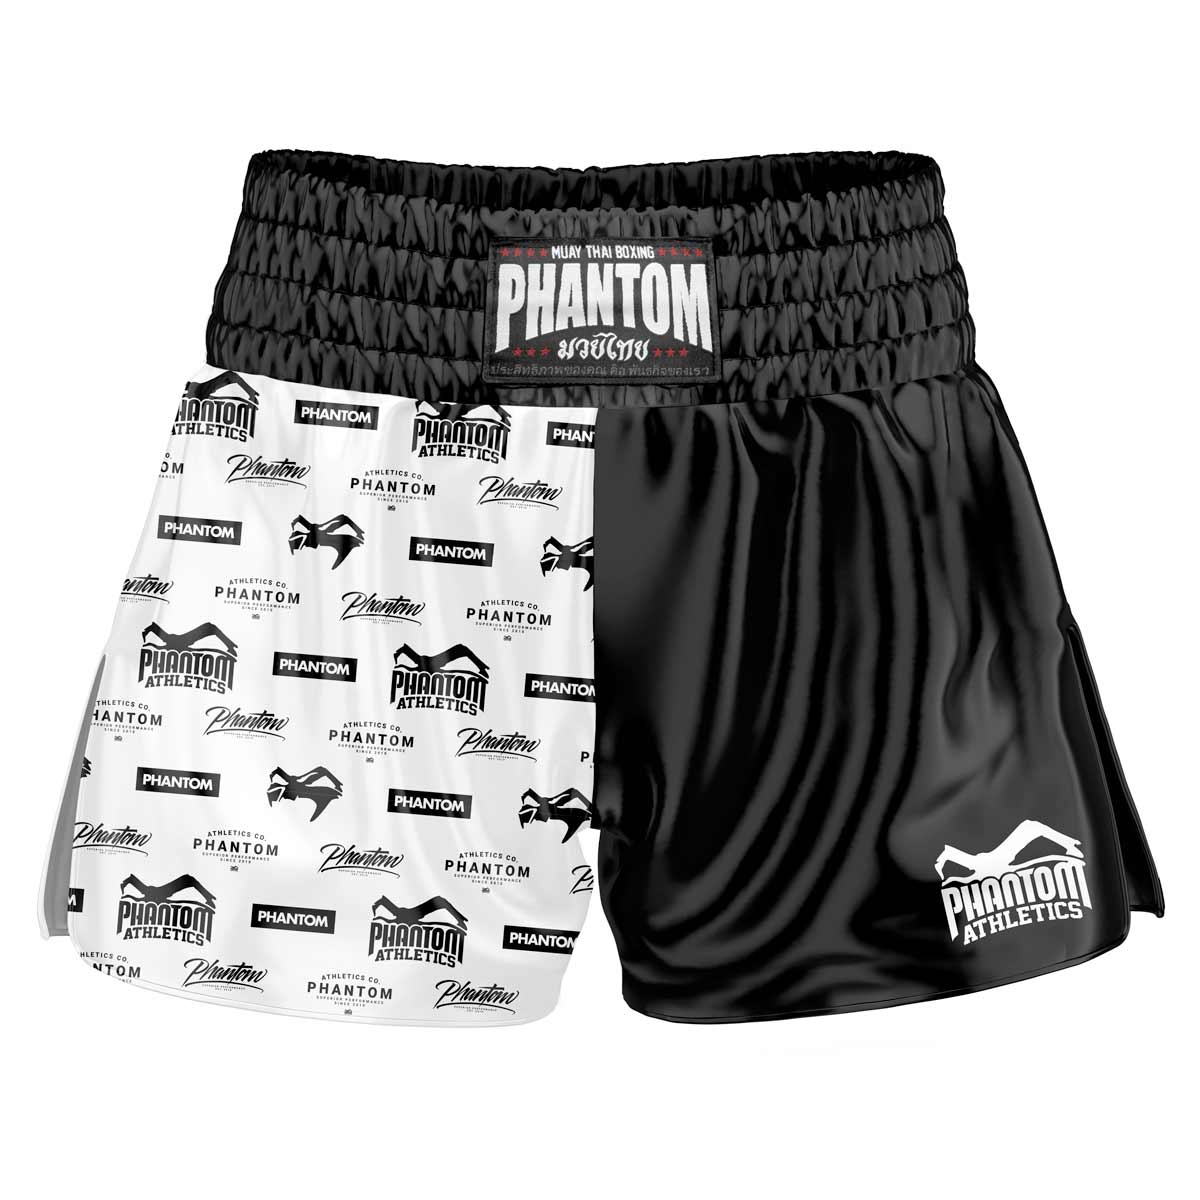 The Phantom Muay Thai Shorts LEGEND. Old school satin fabric gives you an original Thailand feeling. In the usual Phantom Athletics quality. Ideal for your Thai boxing training and competition.